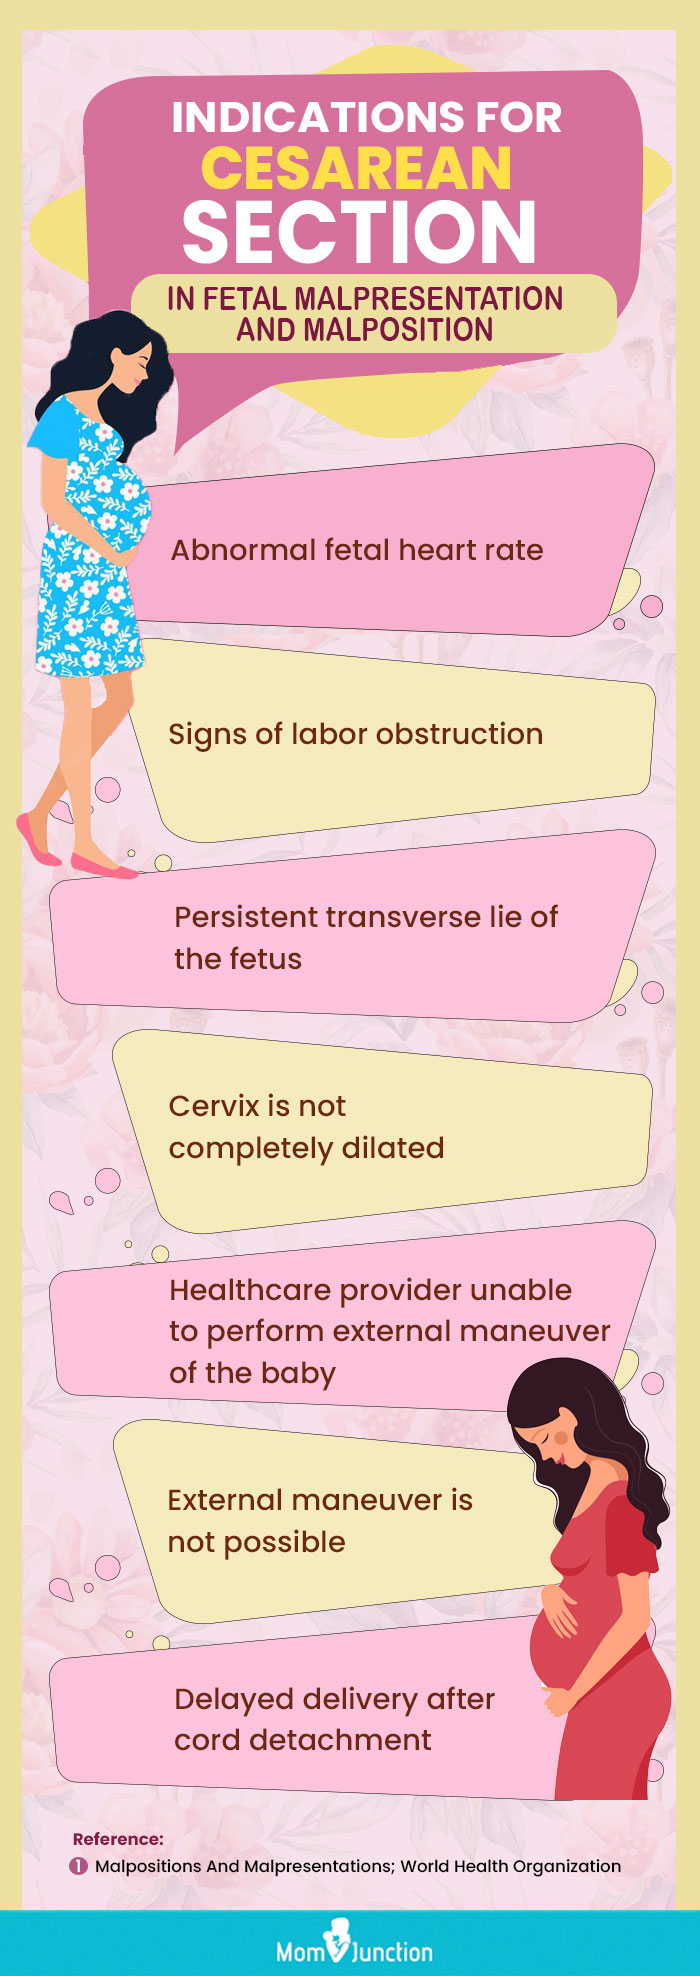 indications for cesarean section in fetal malpresentation and malposition [infographic]